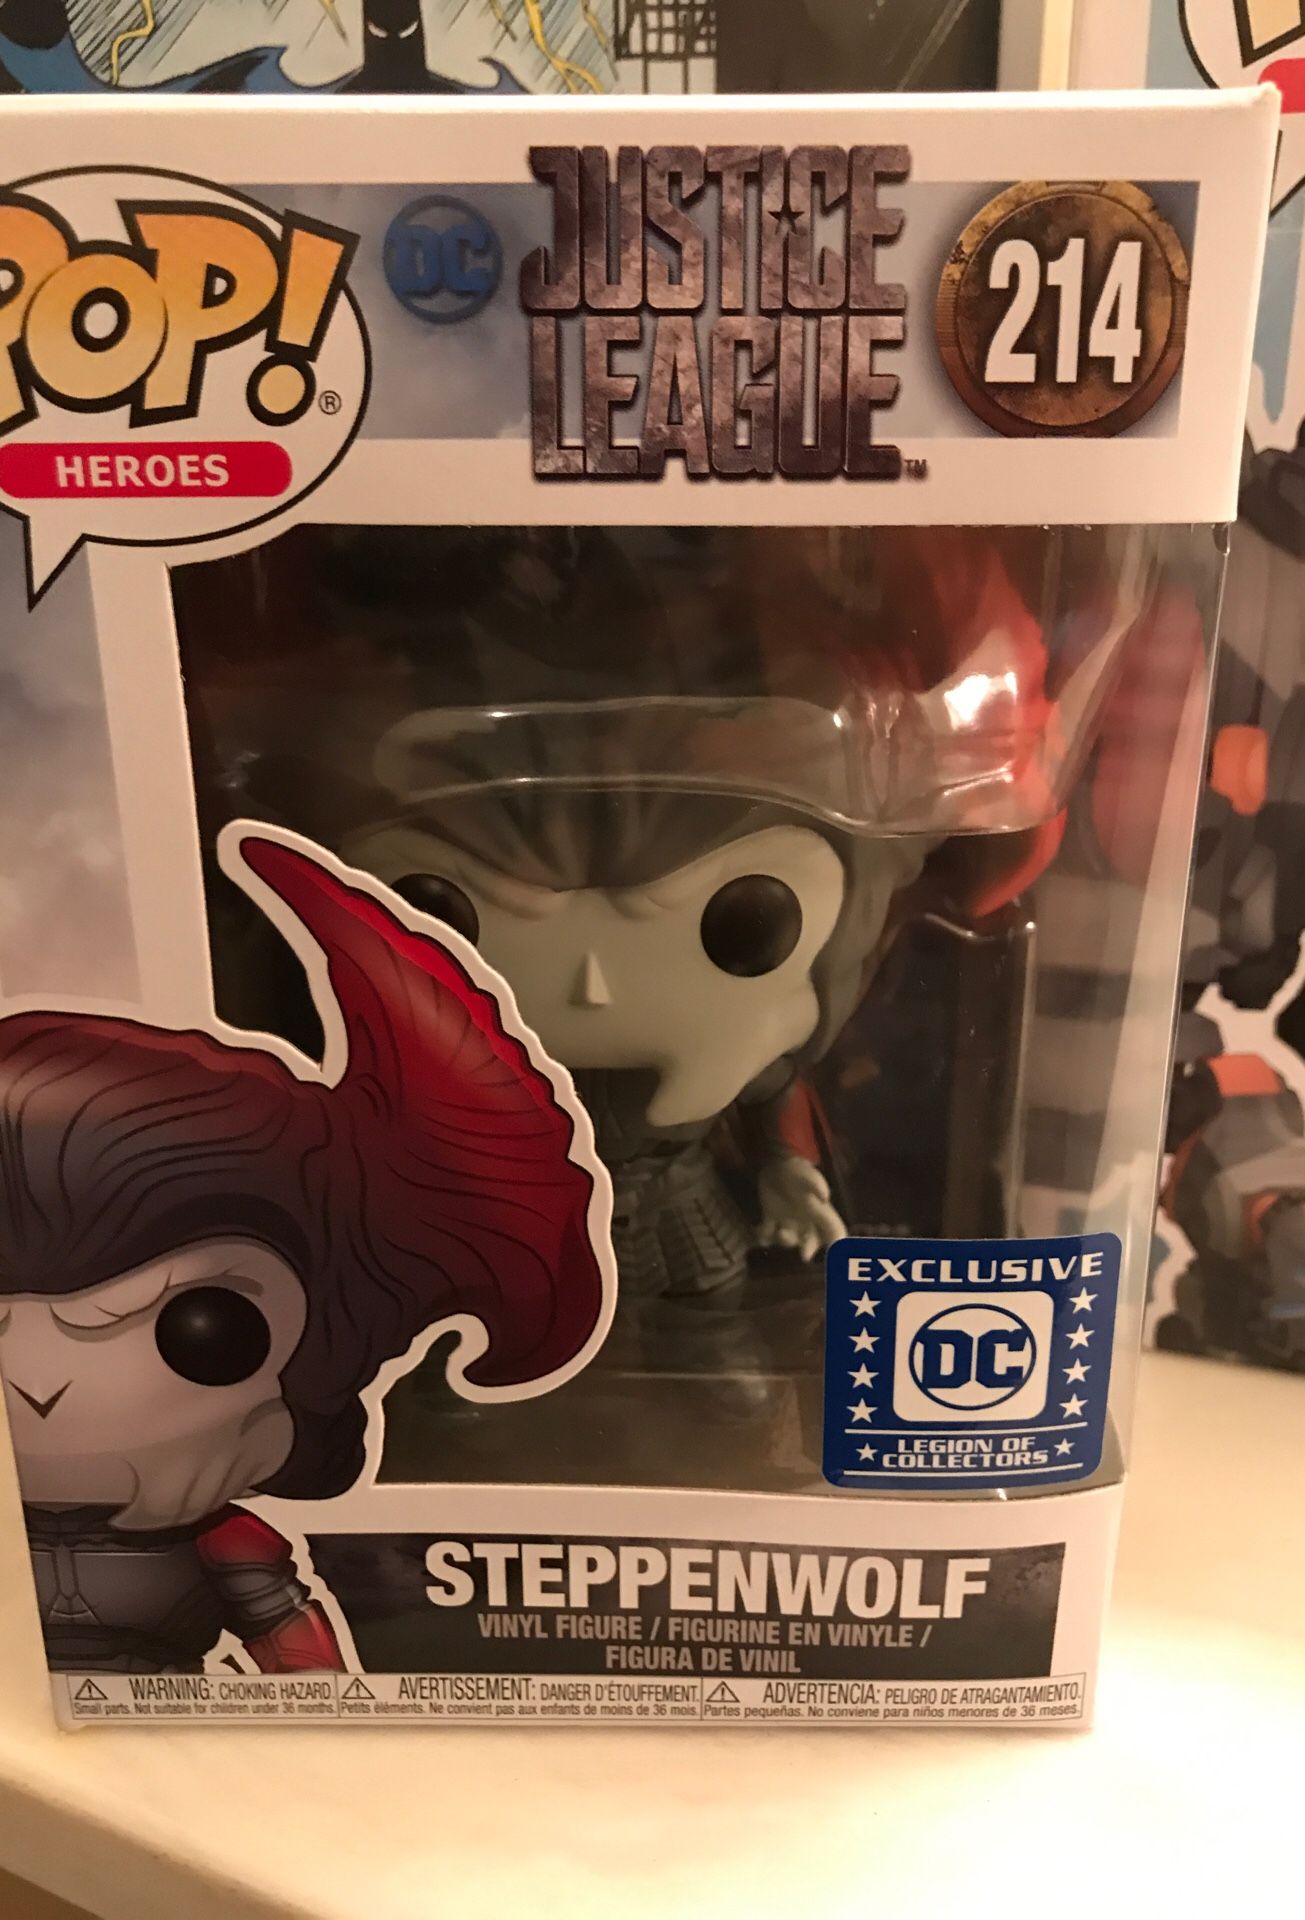 Brand new Funko Pop Justice league Steppenwolf whilst not paying for cereal